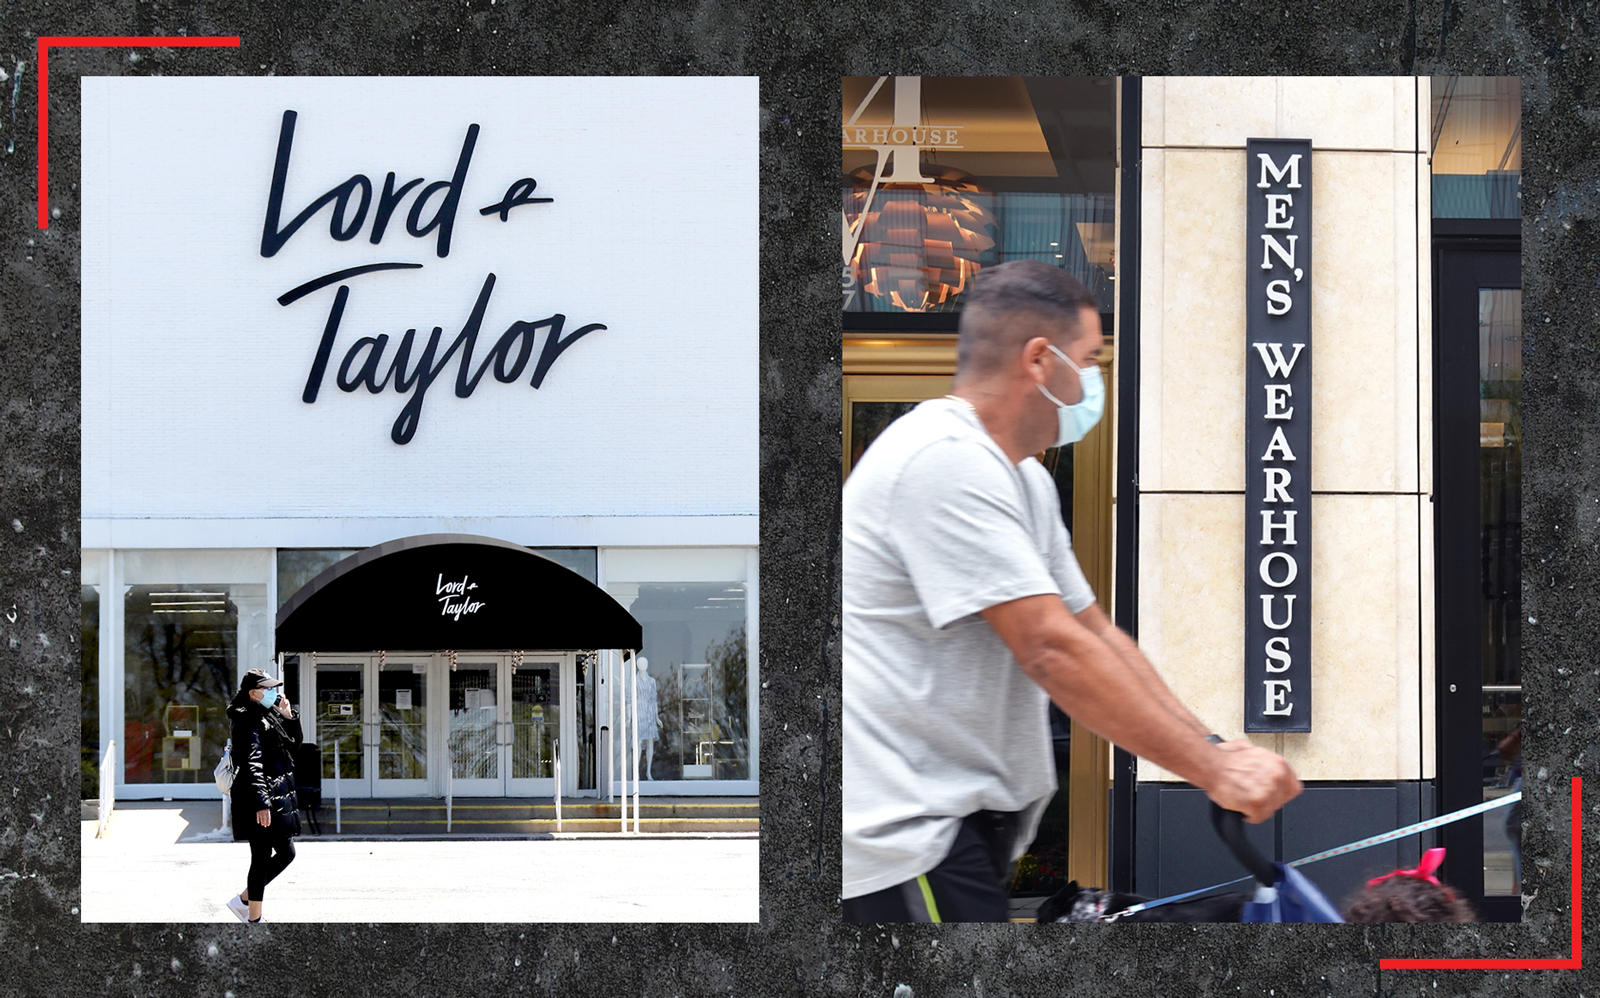 Lord & Taylor and Men’s Wearhouse are just the latest big retail chains to file for bankruptcy (Lord and Taylor by Bruce Bennett/Getty Images; Men's Wearehouse by Scott Olson/Getty Images)